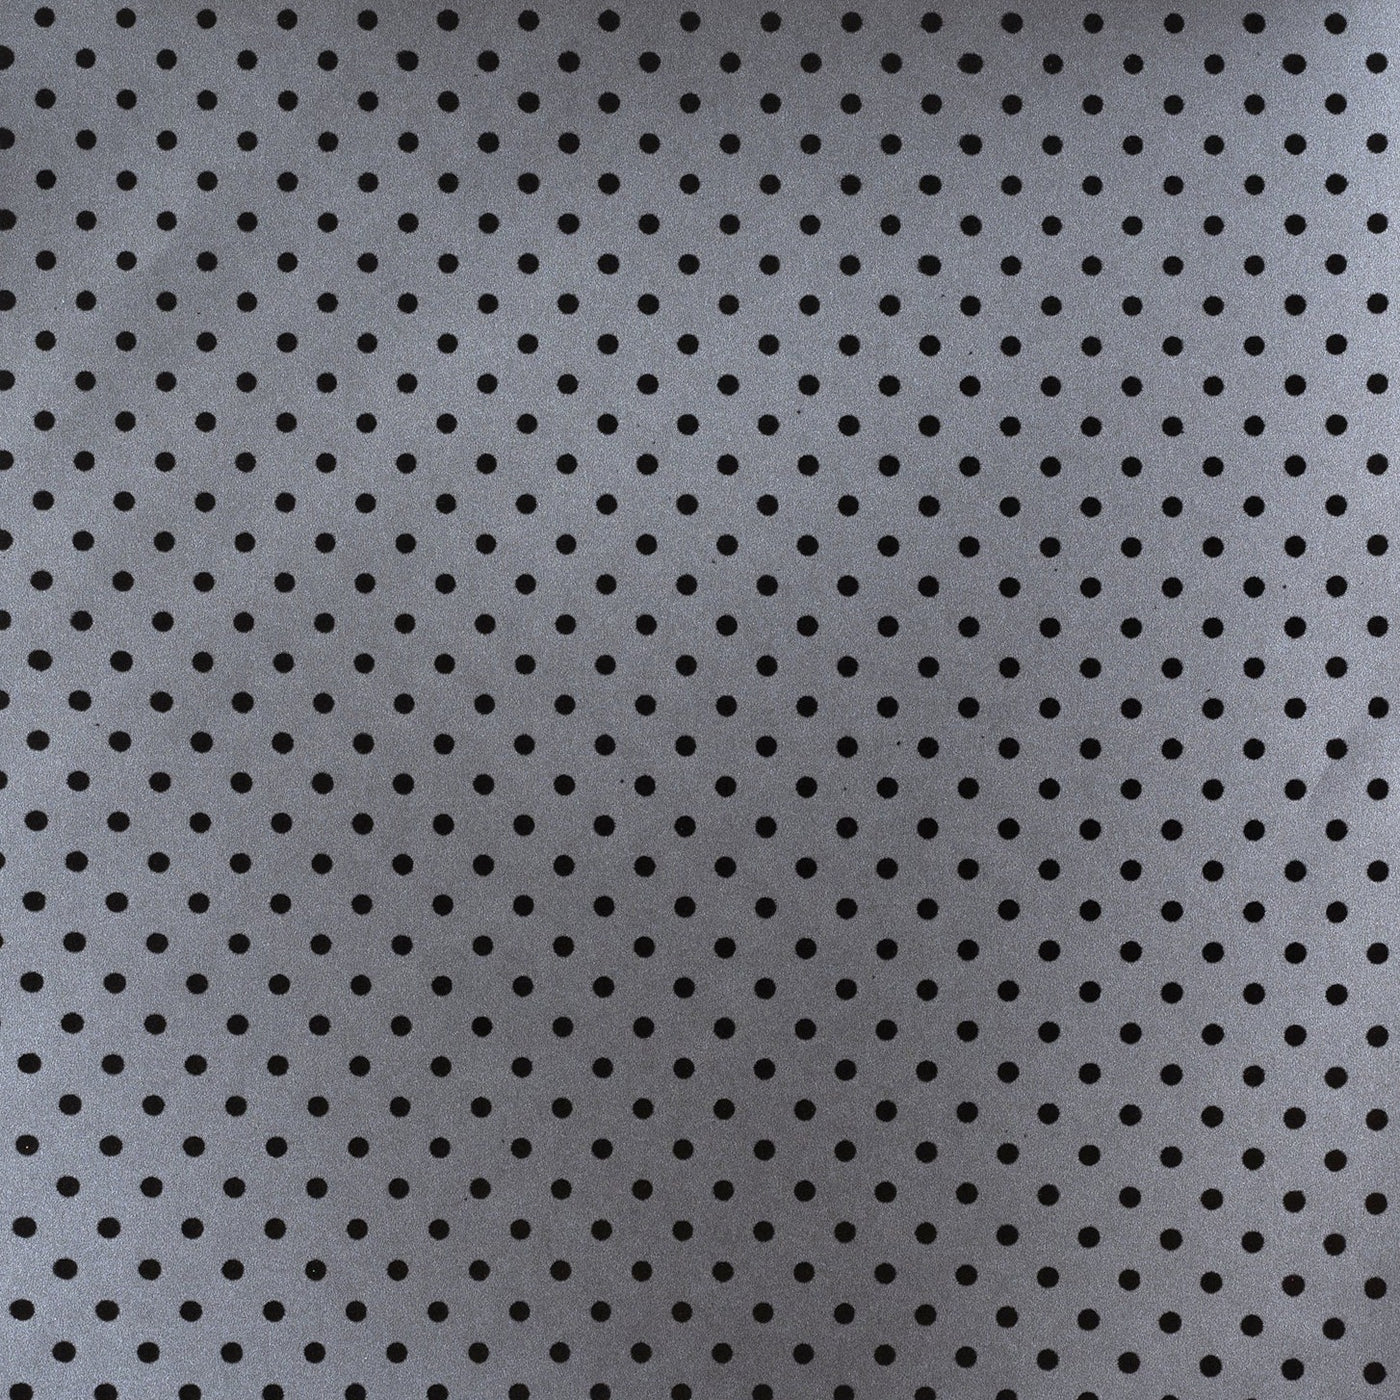 SILVER GRAY (black polka dots on silver, pearlescent cardstock) Printed on one side, white reverse.